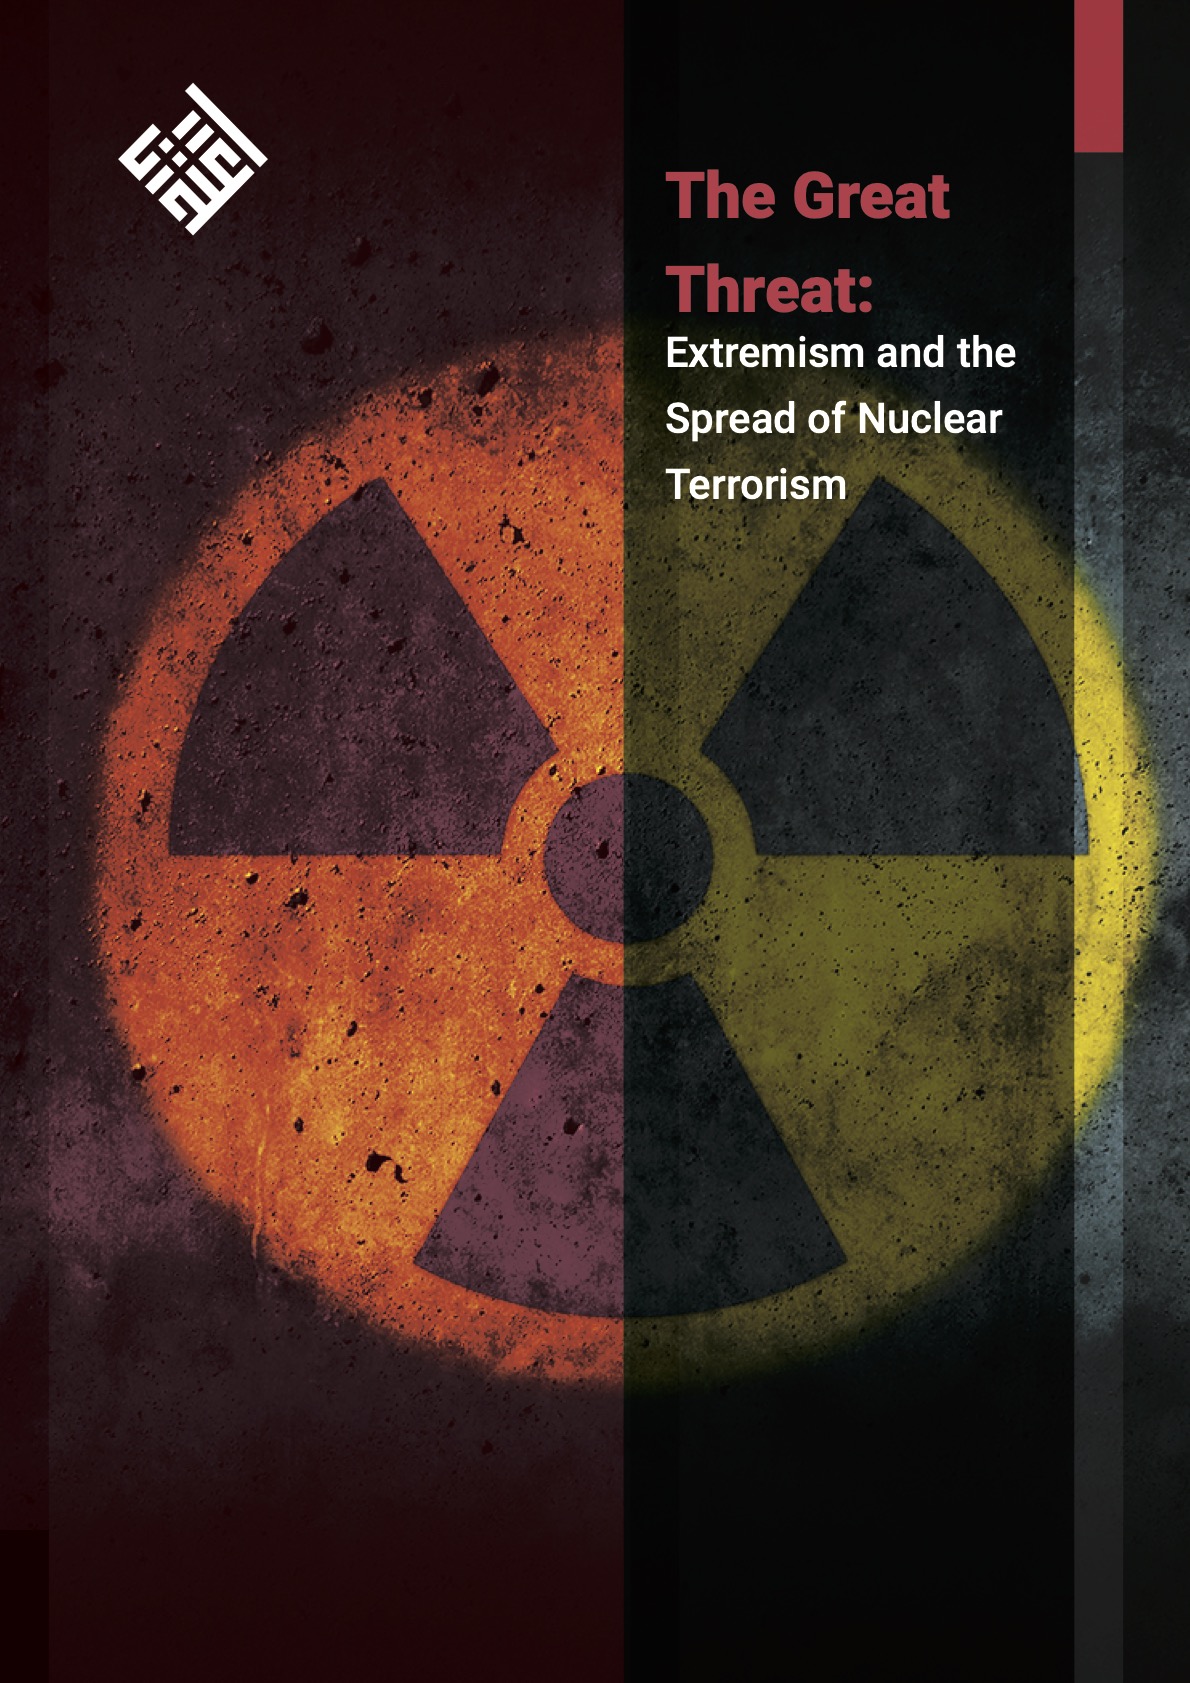 The Great Threat: Extremism and the Spread of Nuclear Terrorism